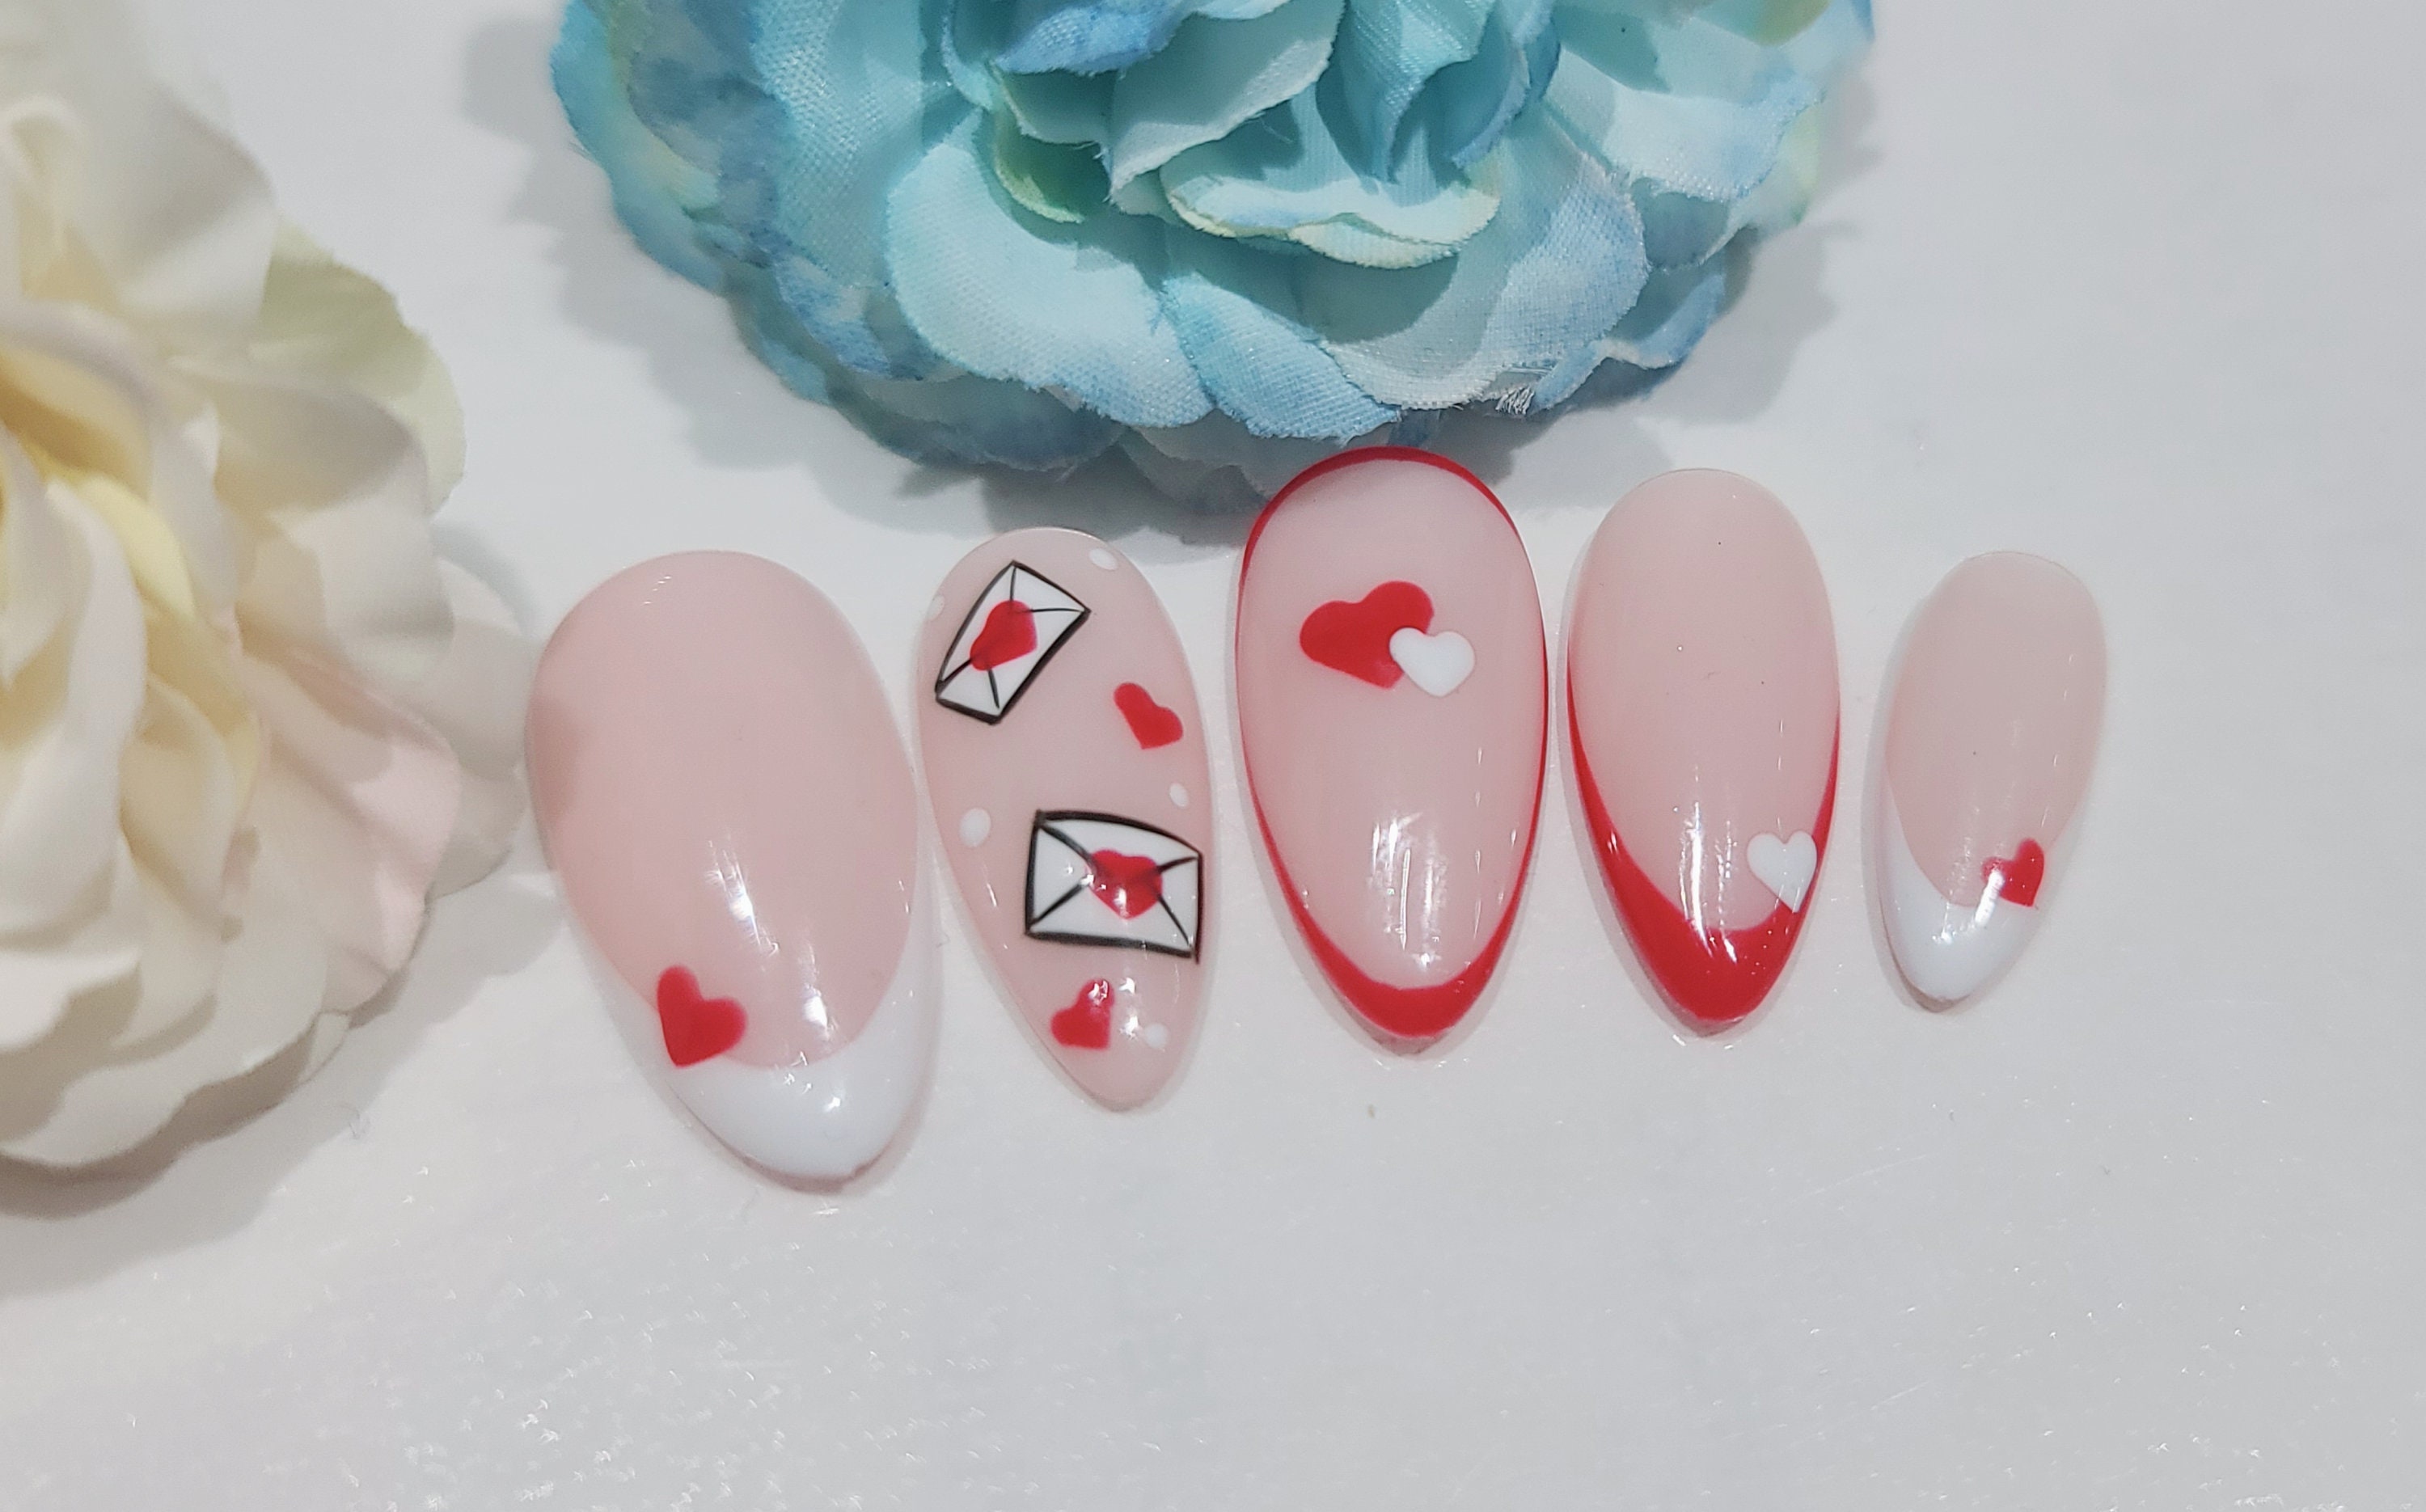 English Letters Alphabet Nail Art Stickers Decals Handwriting